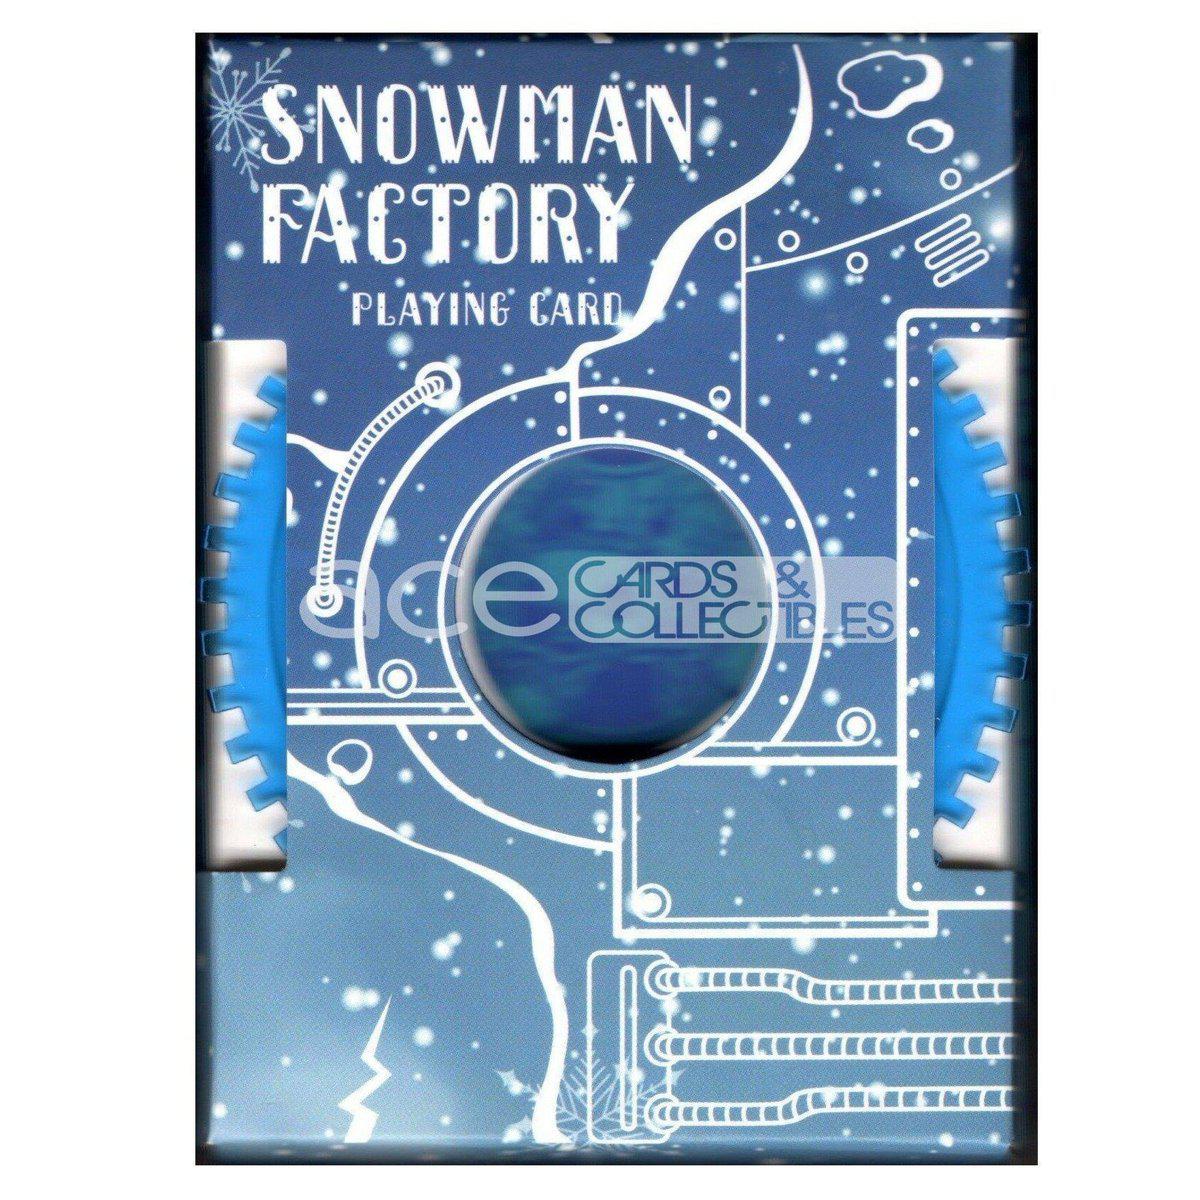 Snowman Factory Playing Cards By Bocopo-United States Playing Cards Company-Ace Cards & Collectibles